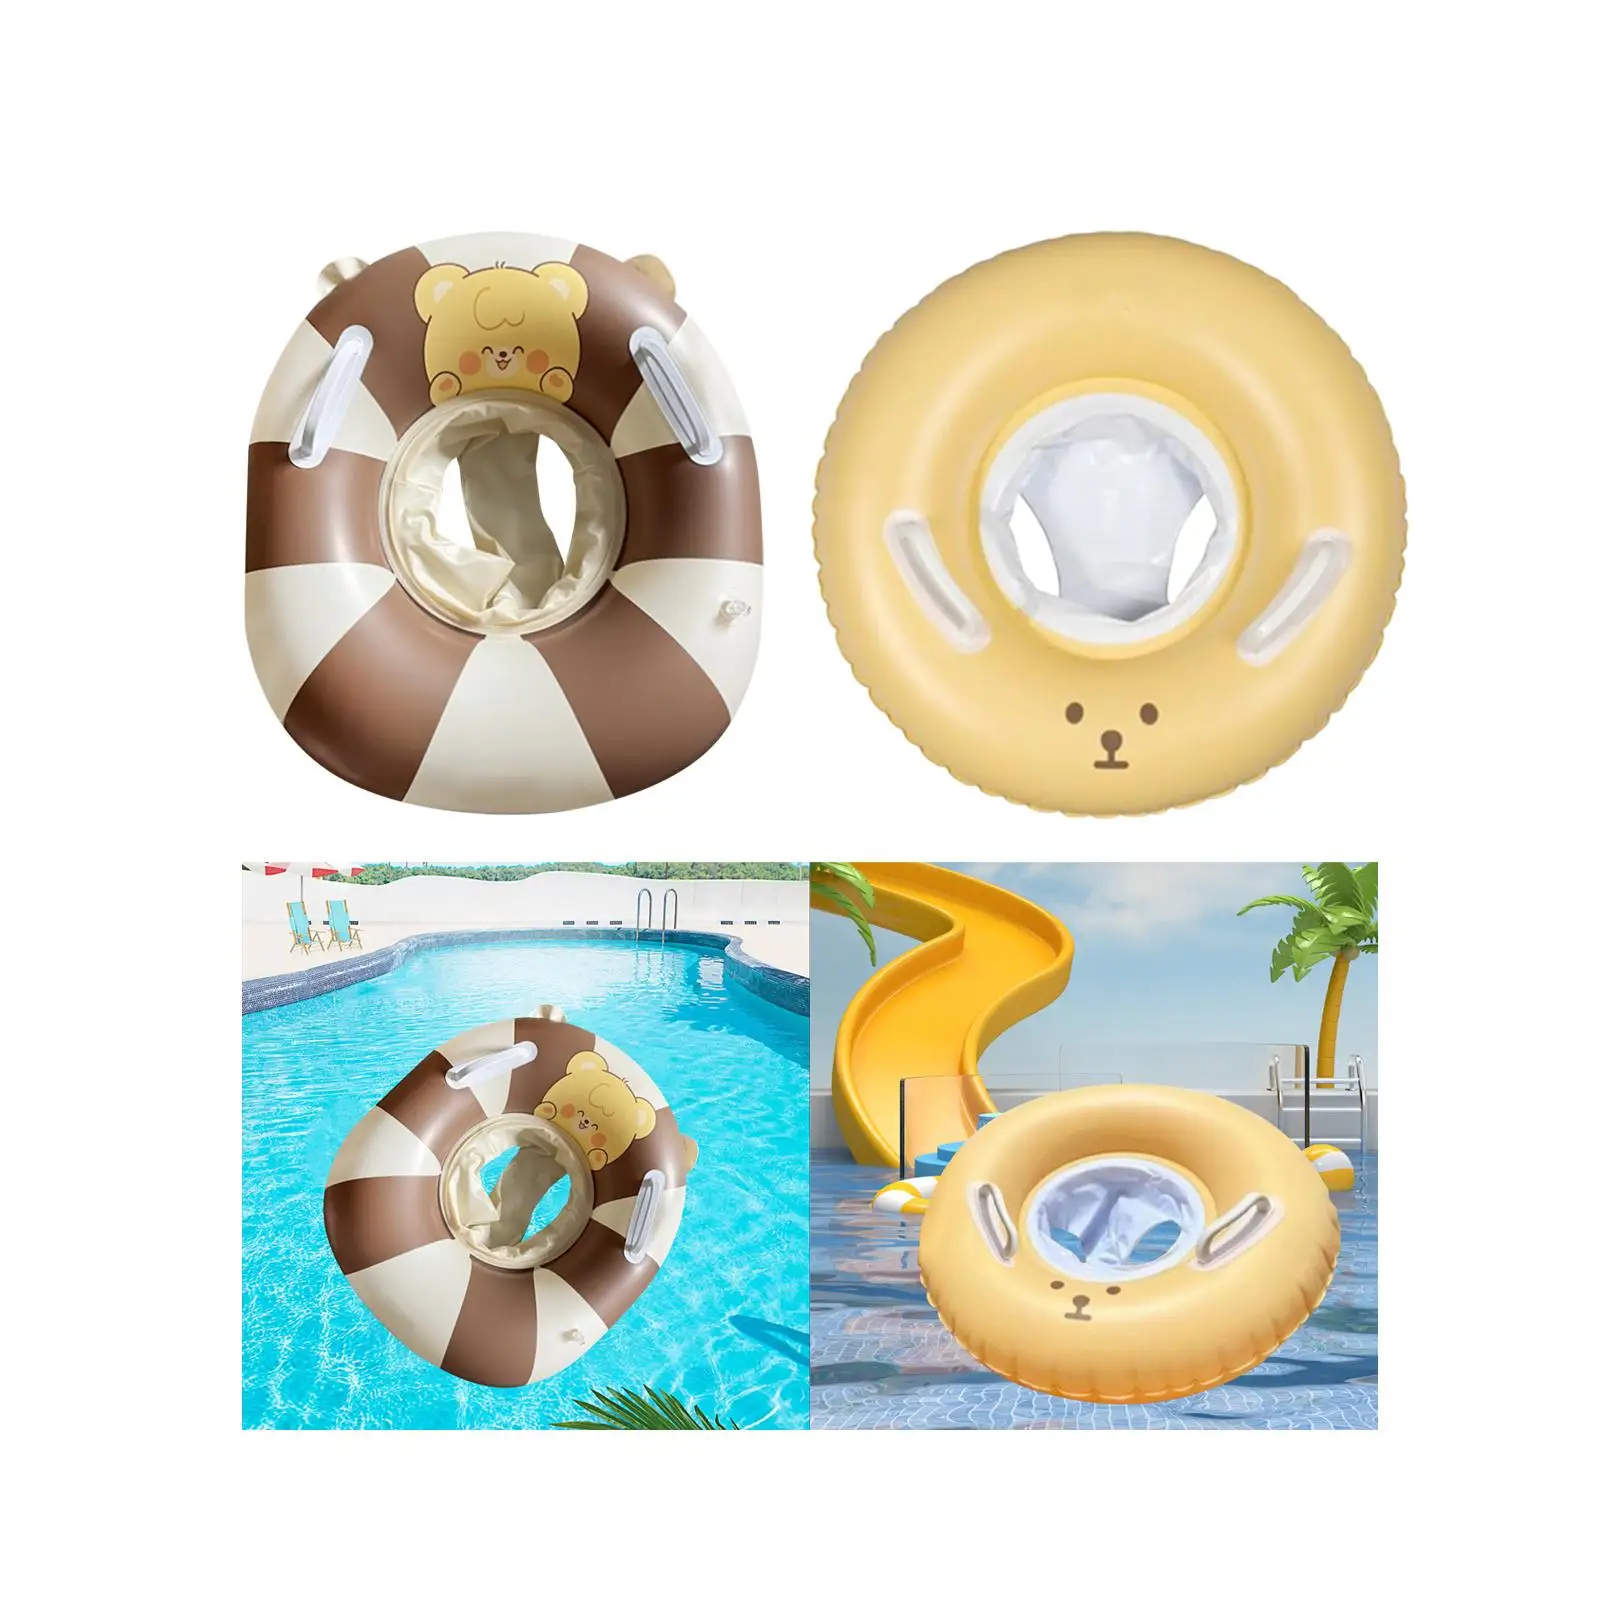 Inflatable Swimming Rings Baby Games Seat Float Boat Child Accessories Pool Toys